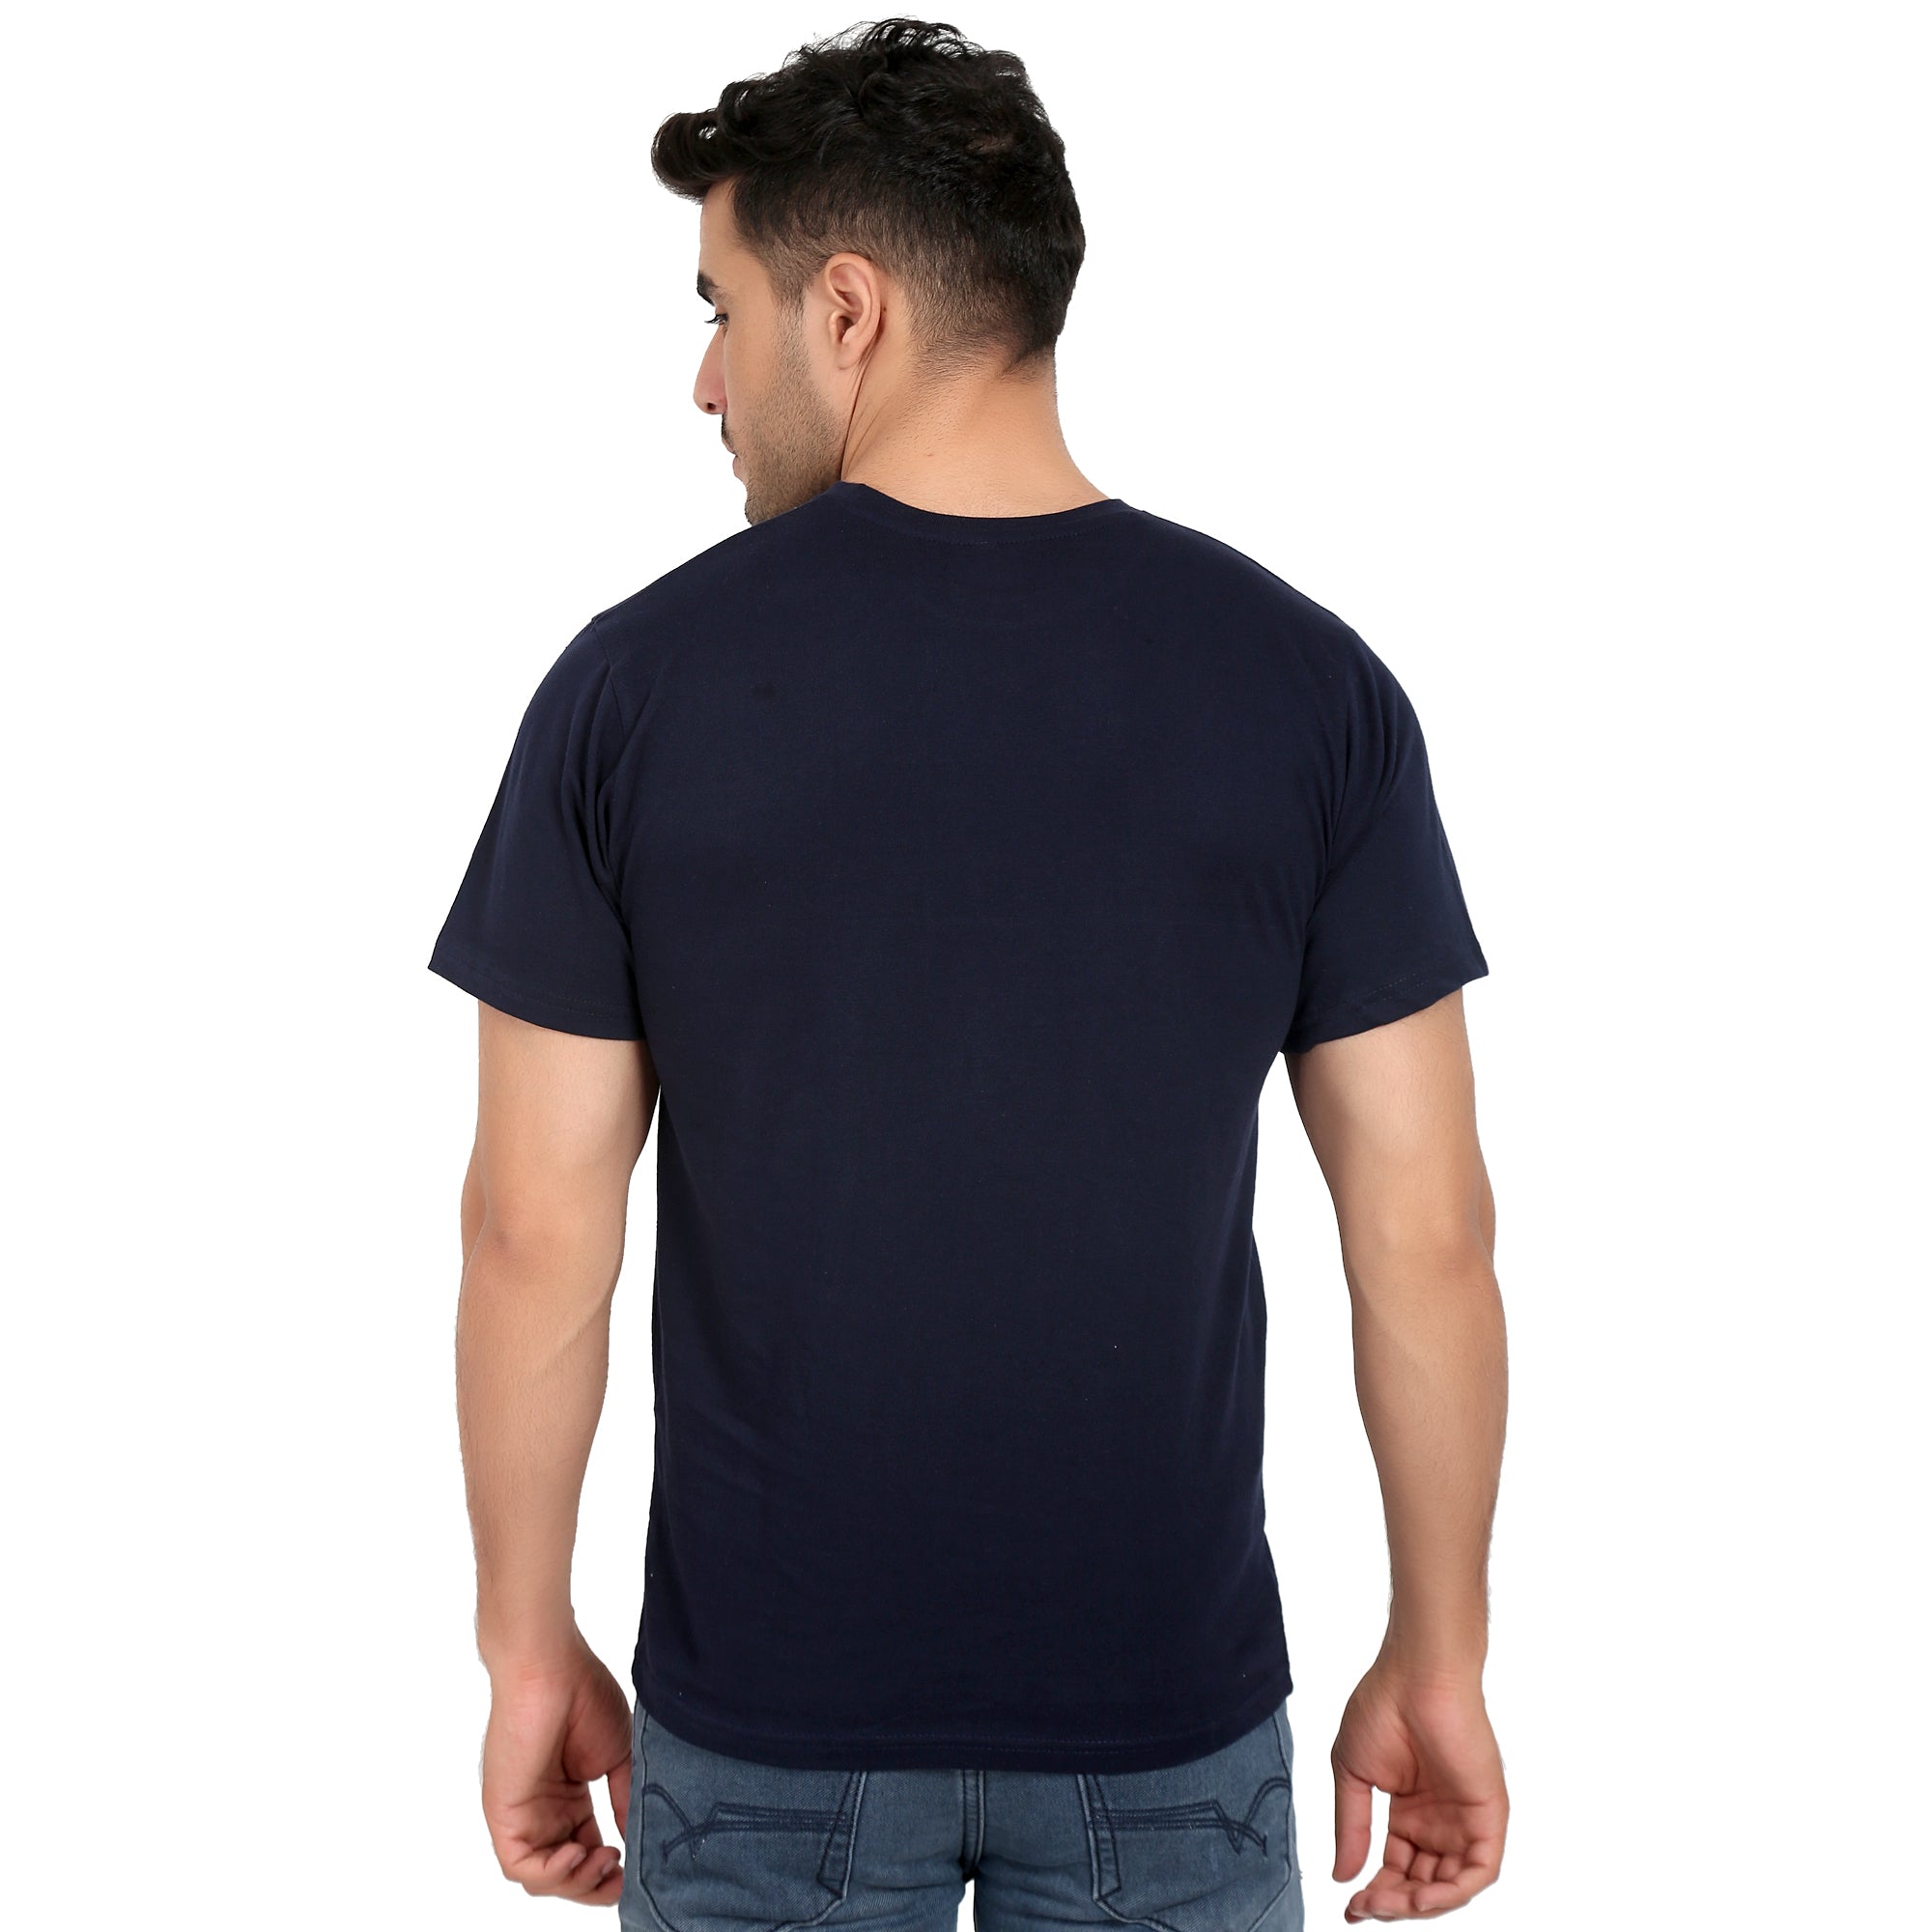 Combo Offer - Men Crew Neck Cotton T-Shirts - Half Sleeves - 3 Colors - Navy Blue, Blue & White